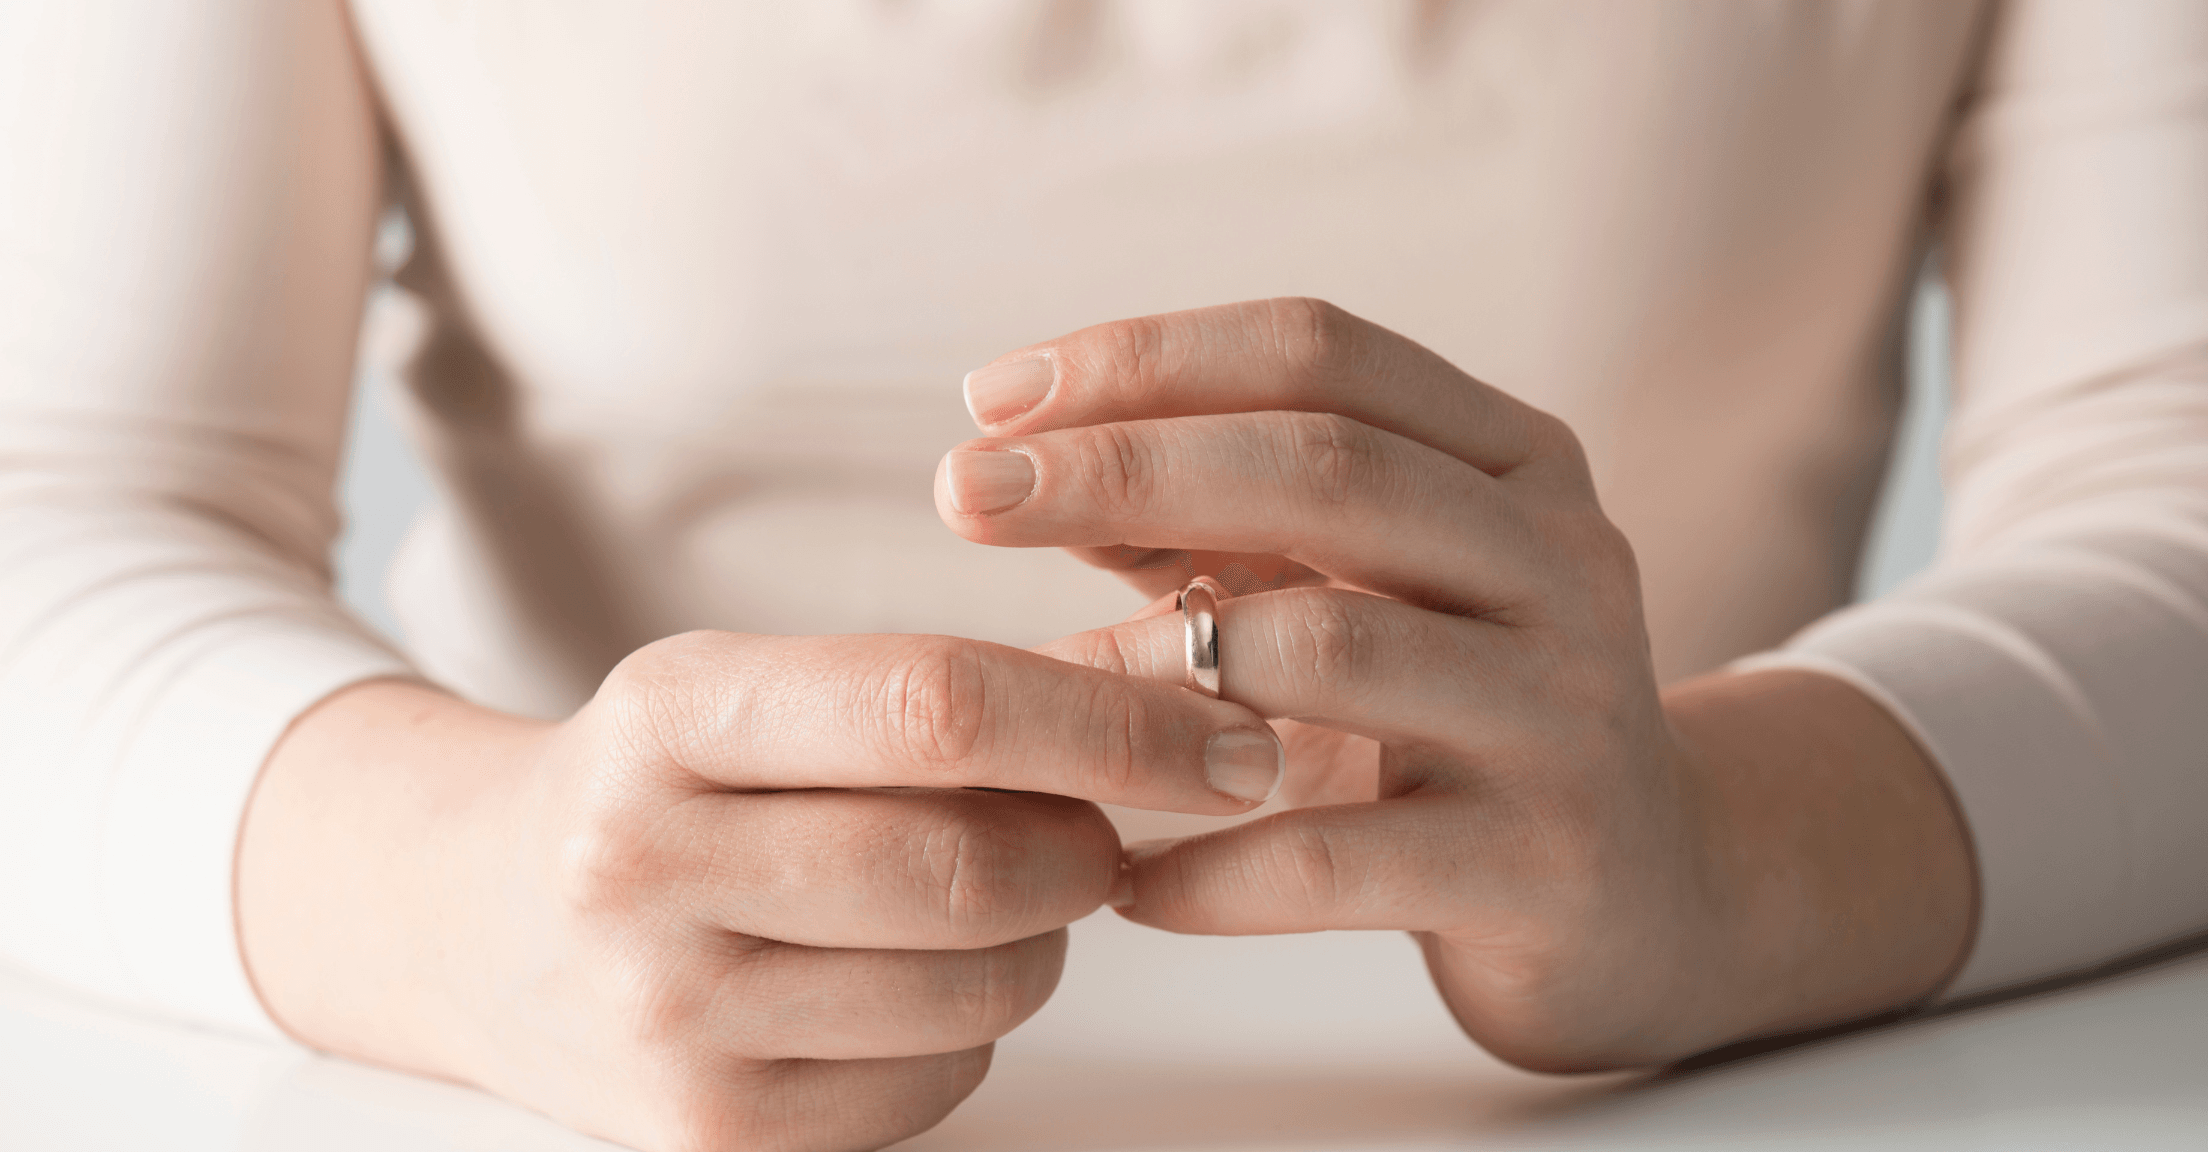 Close-up of a woman's hands, holding her wedding ring closer to the edge of her finger